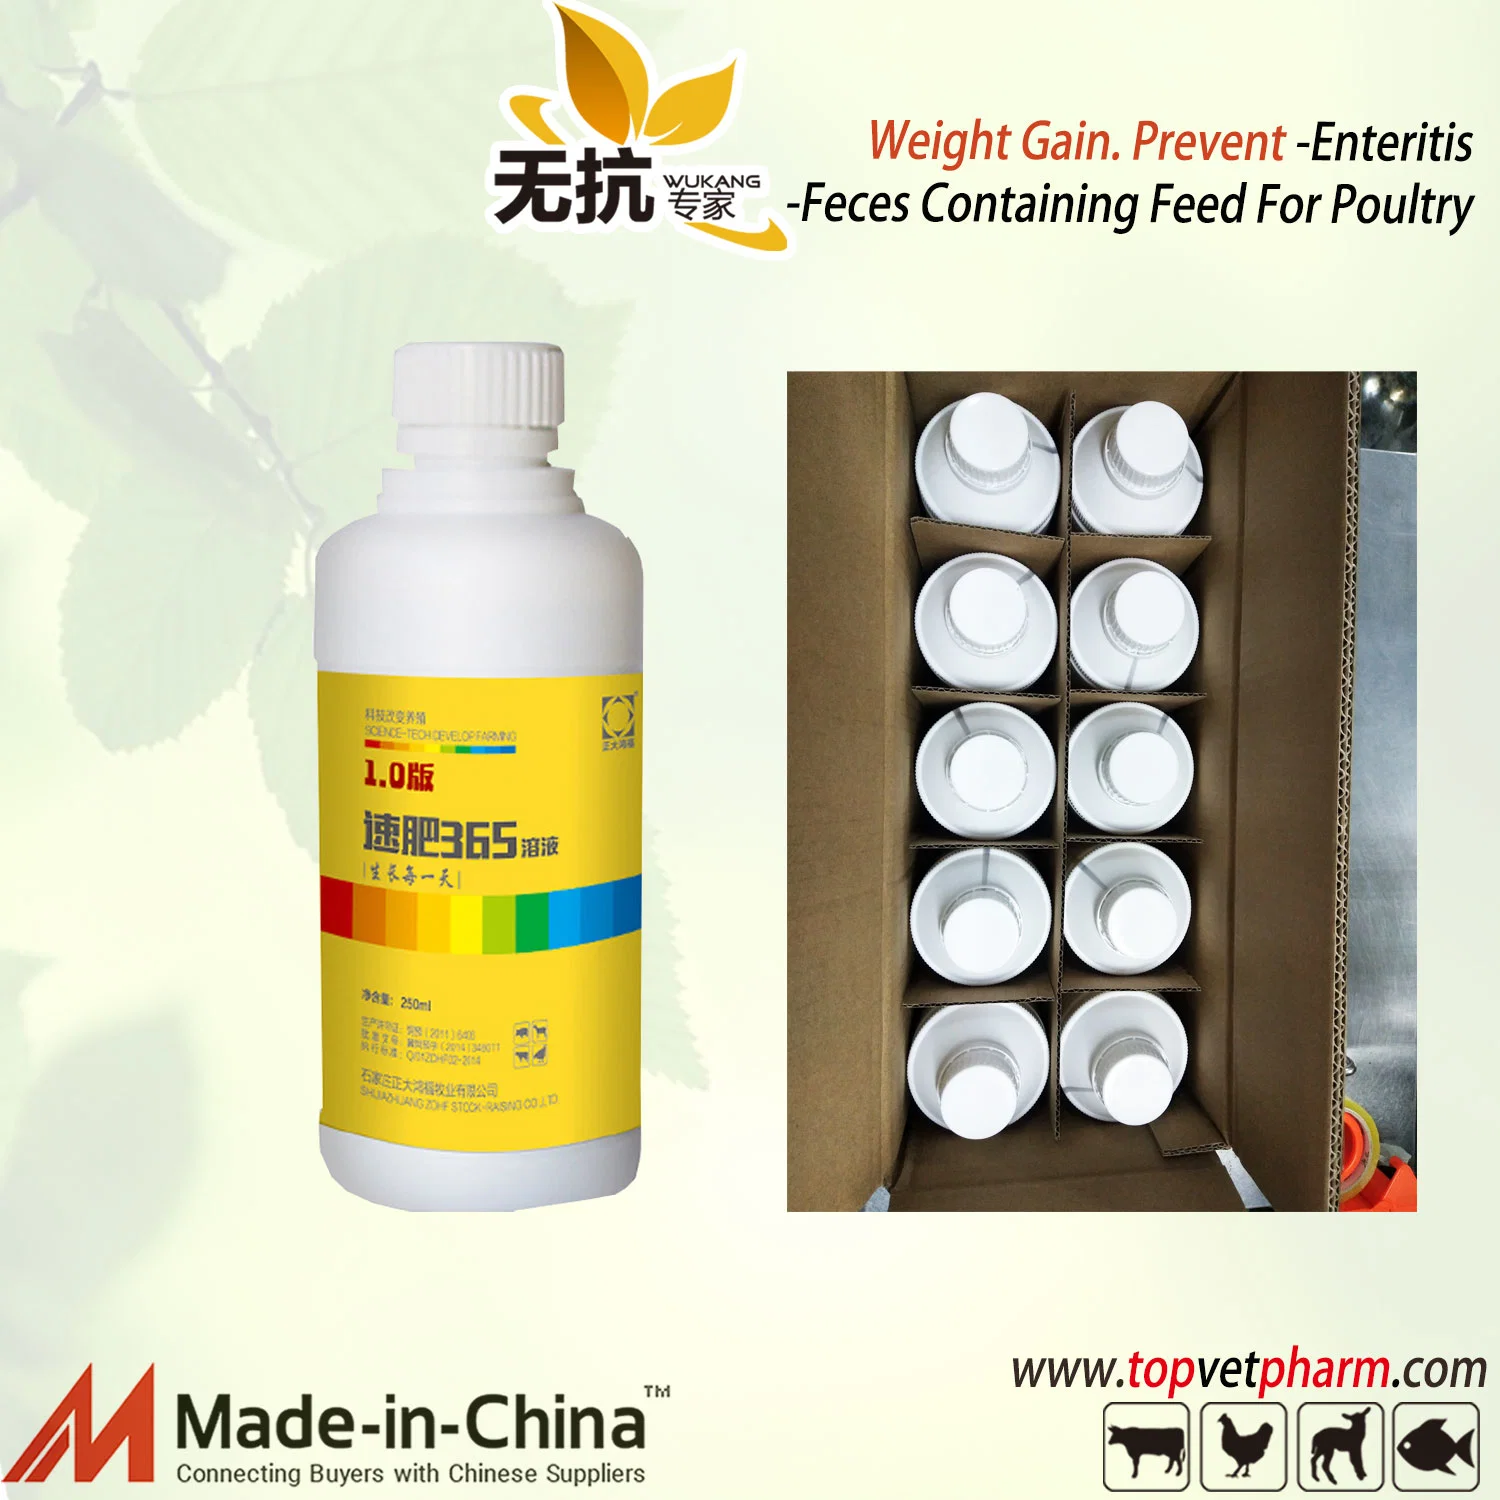 Premium Growth Booster for Broilers Chicken Weight Gain Medicine